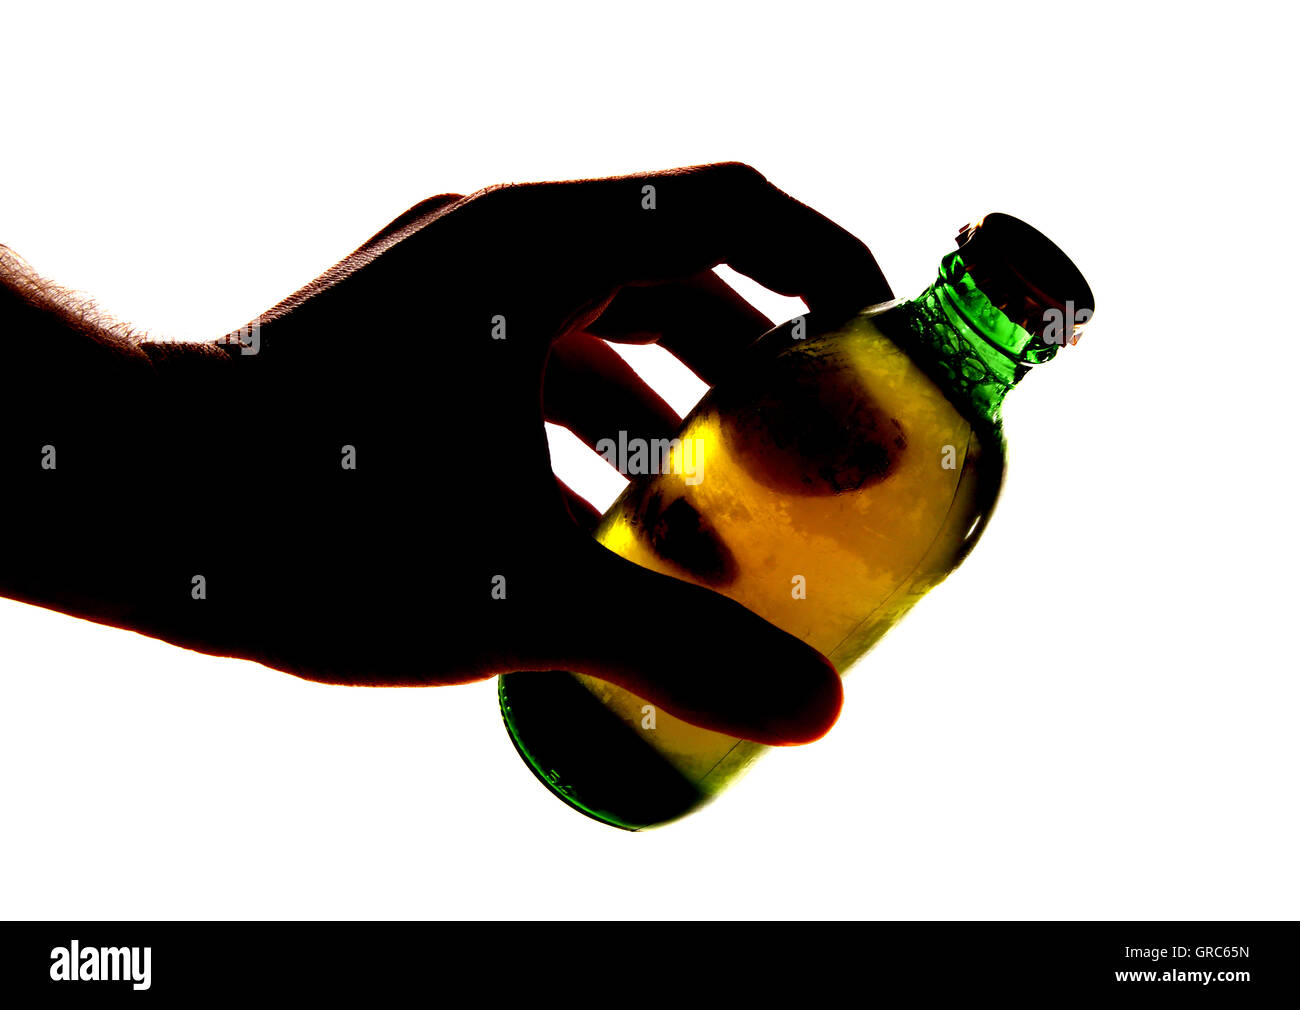 Silhouette of hand holding bottle of larger cutout Stock Photo